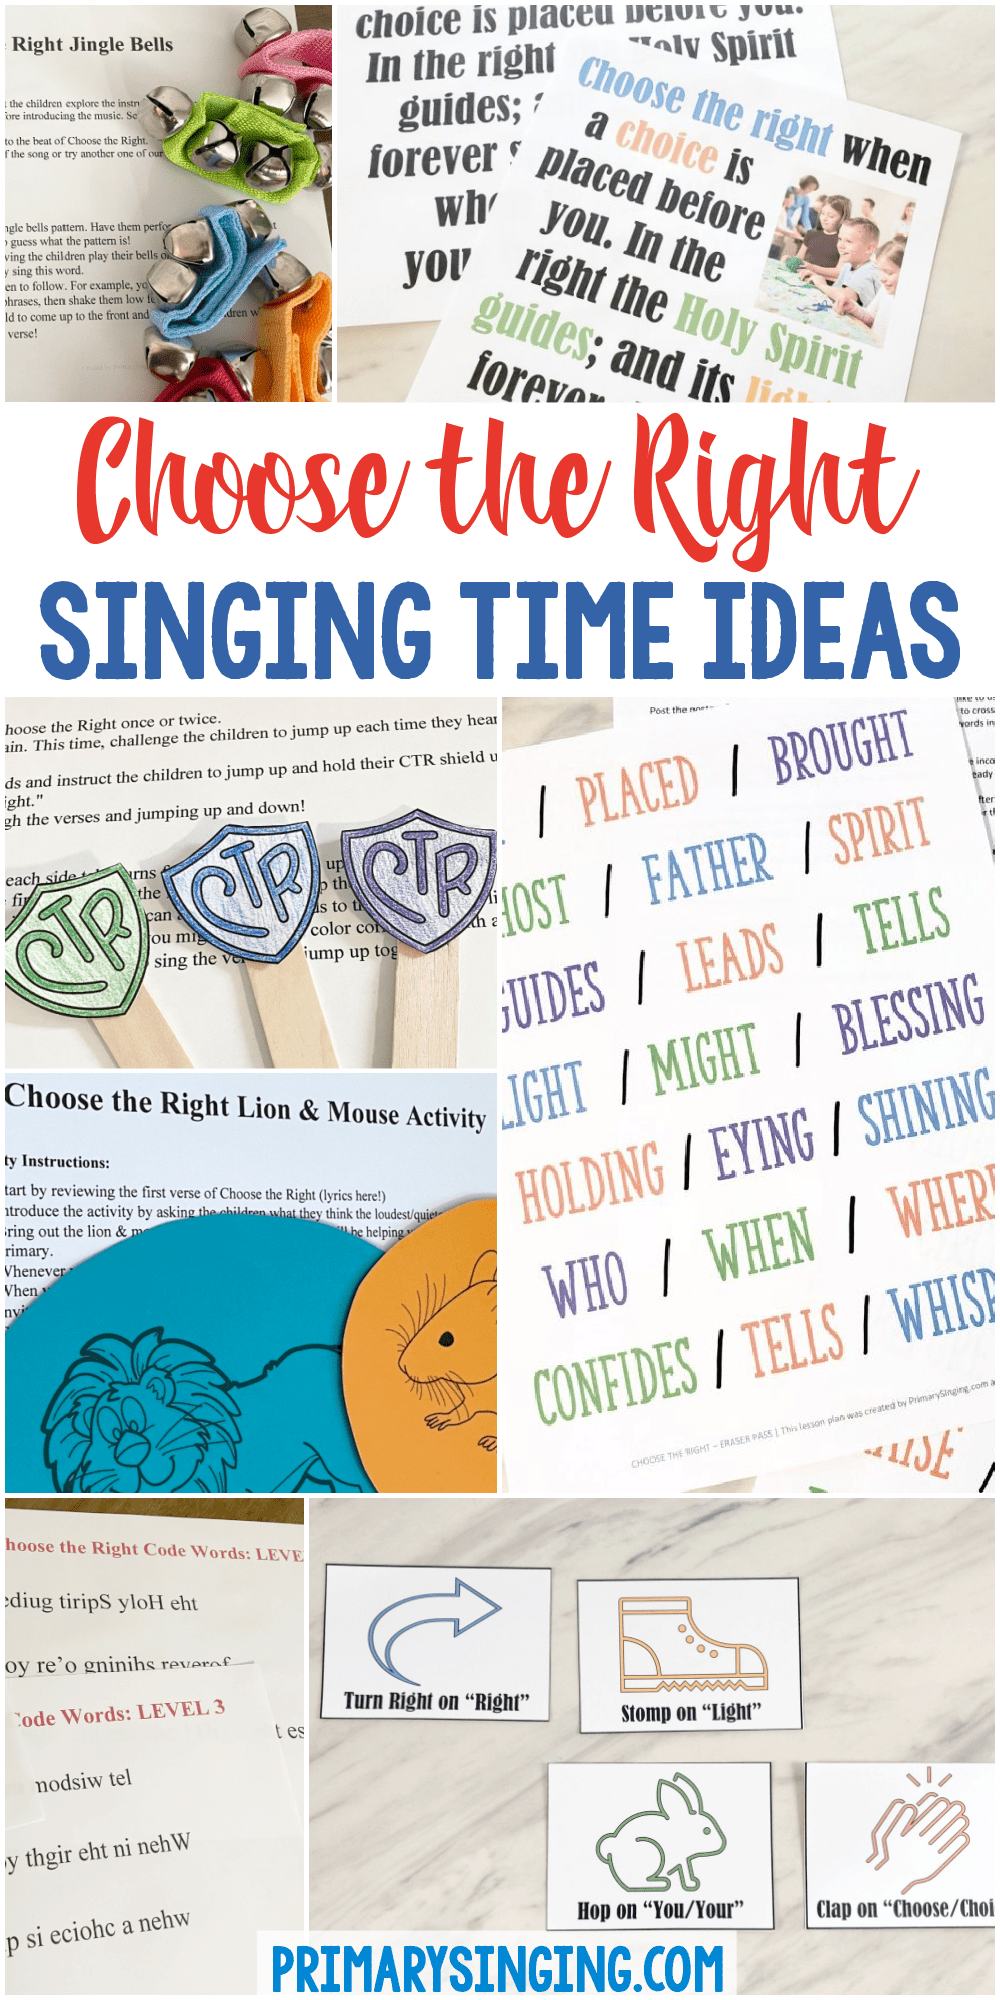 Choose the Right Singing Time Ideas for this beloved LDS Hymn with quick, easy and fun ways to teach this song for LDS Primary Music Leaders